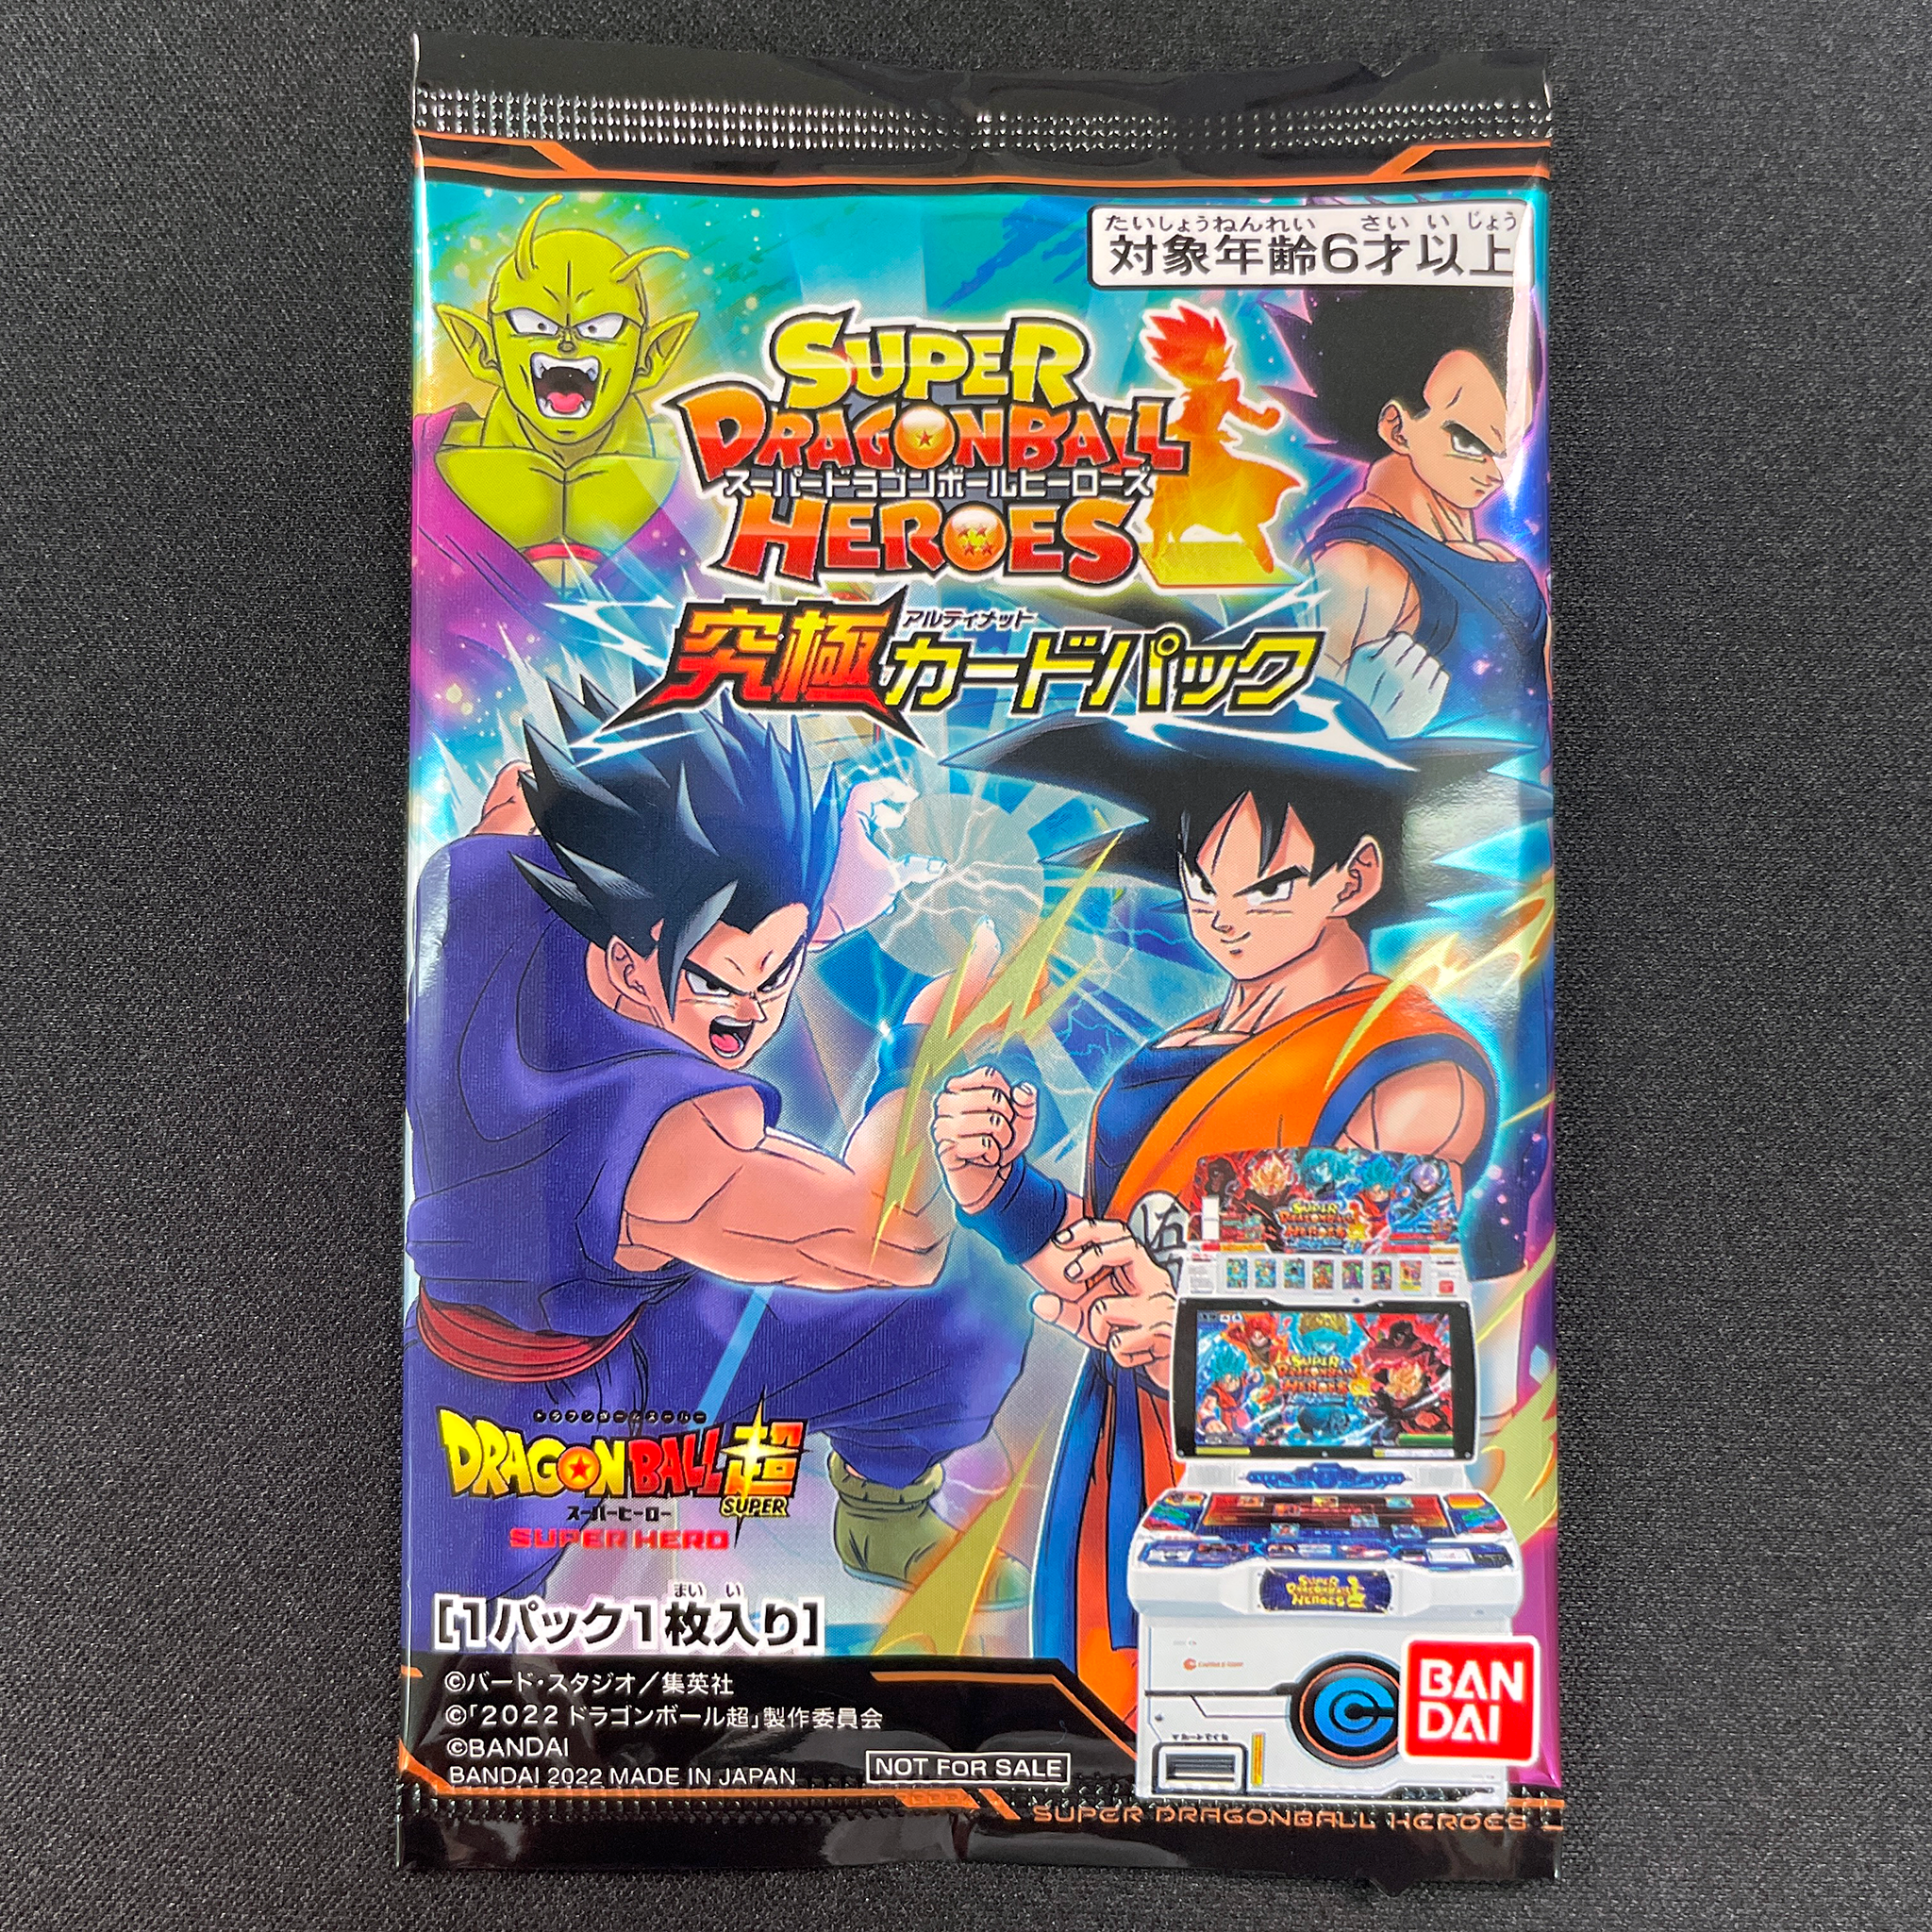 SUPER DRAGON BALL HEROES ULTIMATE CARD PACK DRAGON BALL SUPER SUPER HERO  Promotional card given at the entrance of the movie DRAGON BALL SUPER SUPER HERO in Japanese theaters from June 11 2022.  The card was given in a closed booster, without knowing which character it contains.  UGMSH-01 Son Goku : SH or UGMSH-02 Son Gohan : SH  Product for collectors who want to keep sealed pack.